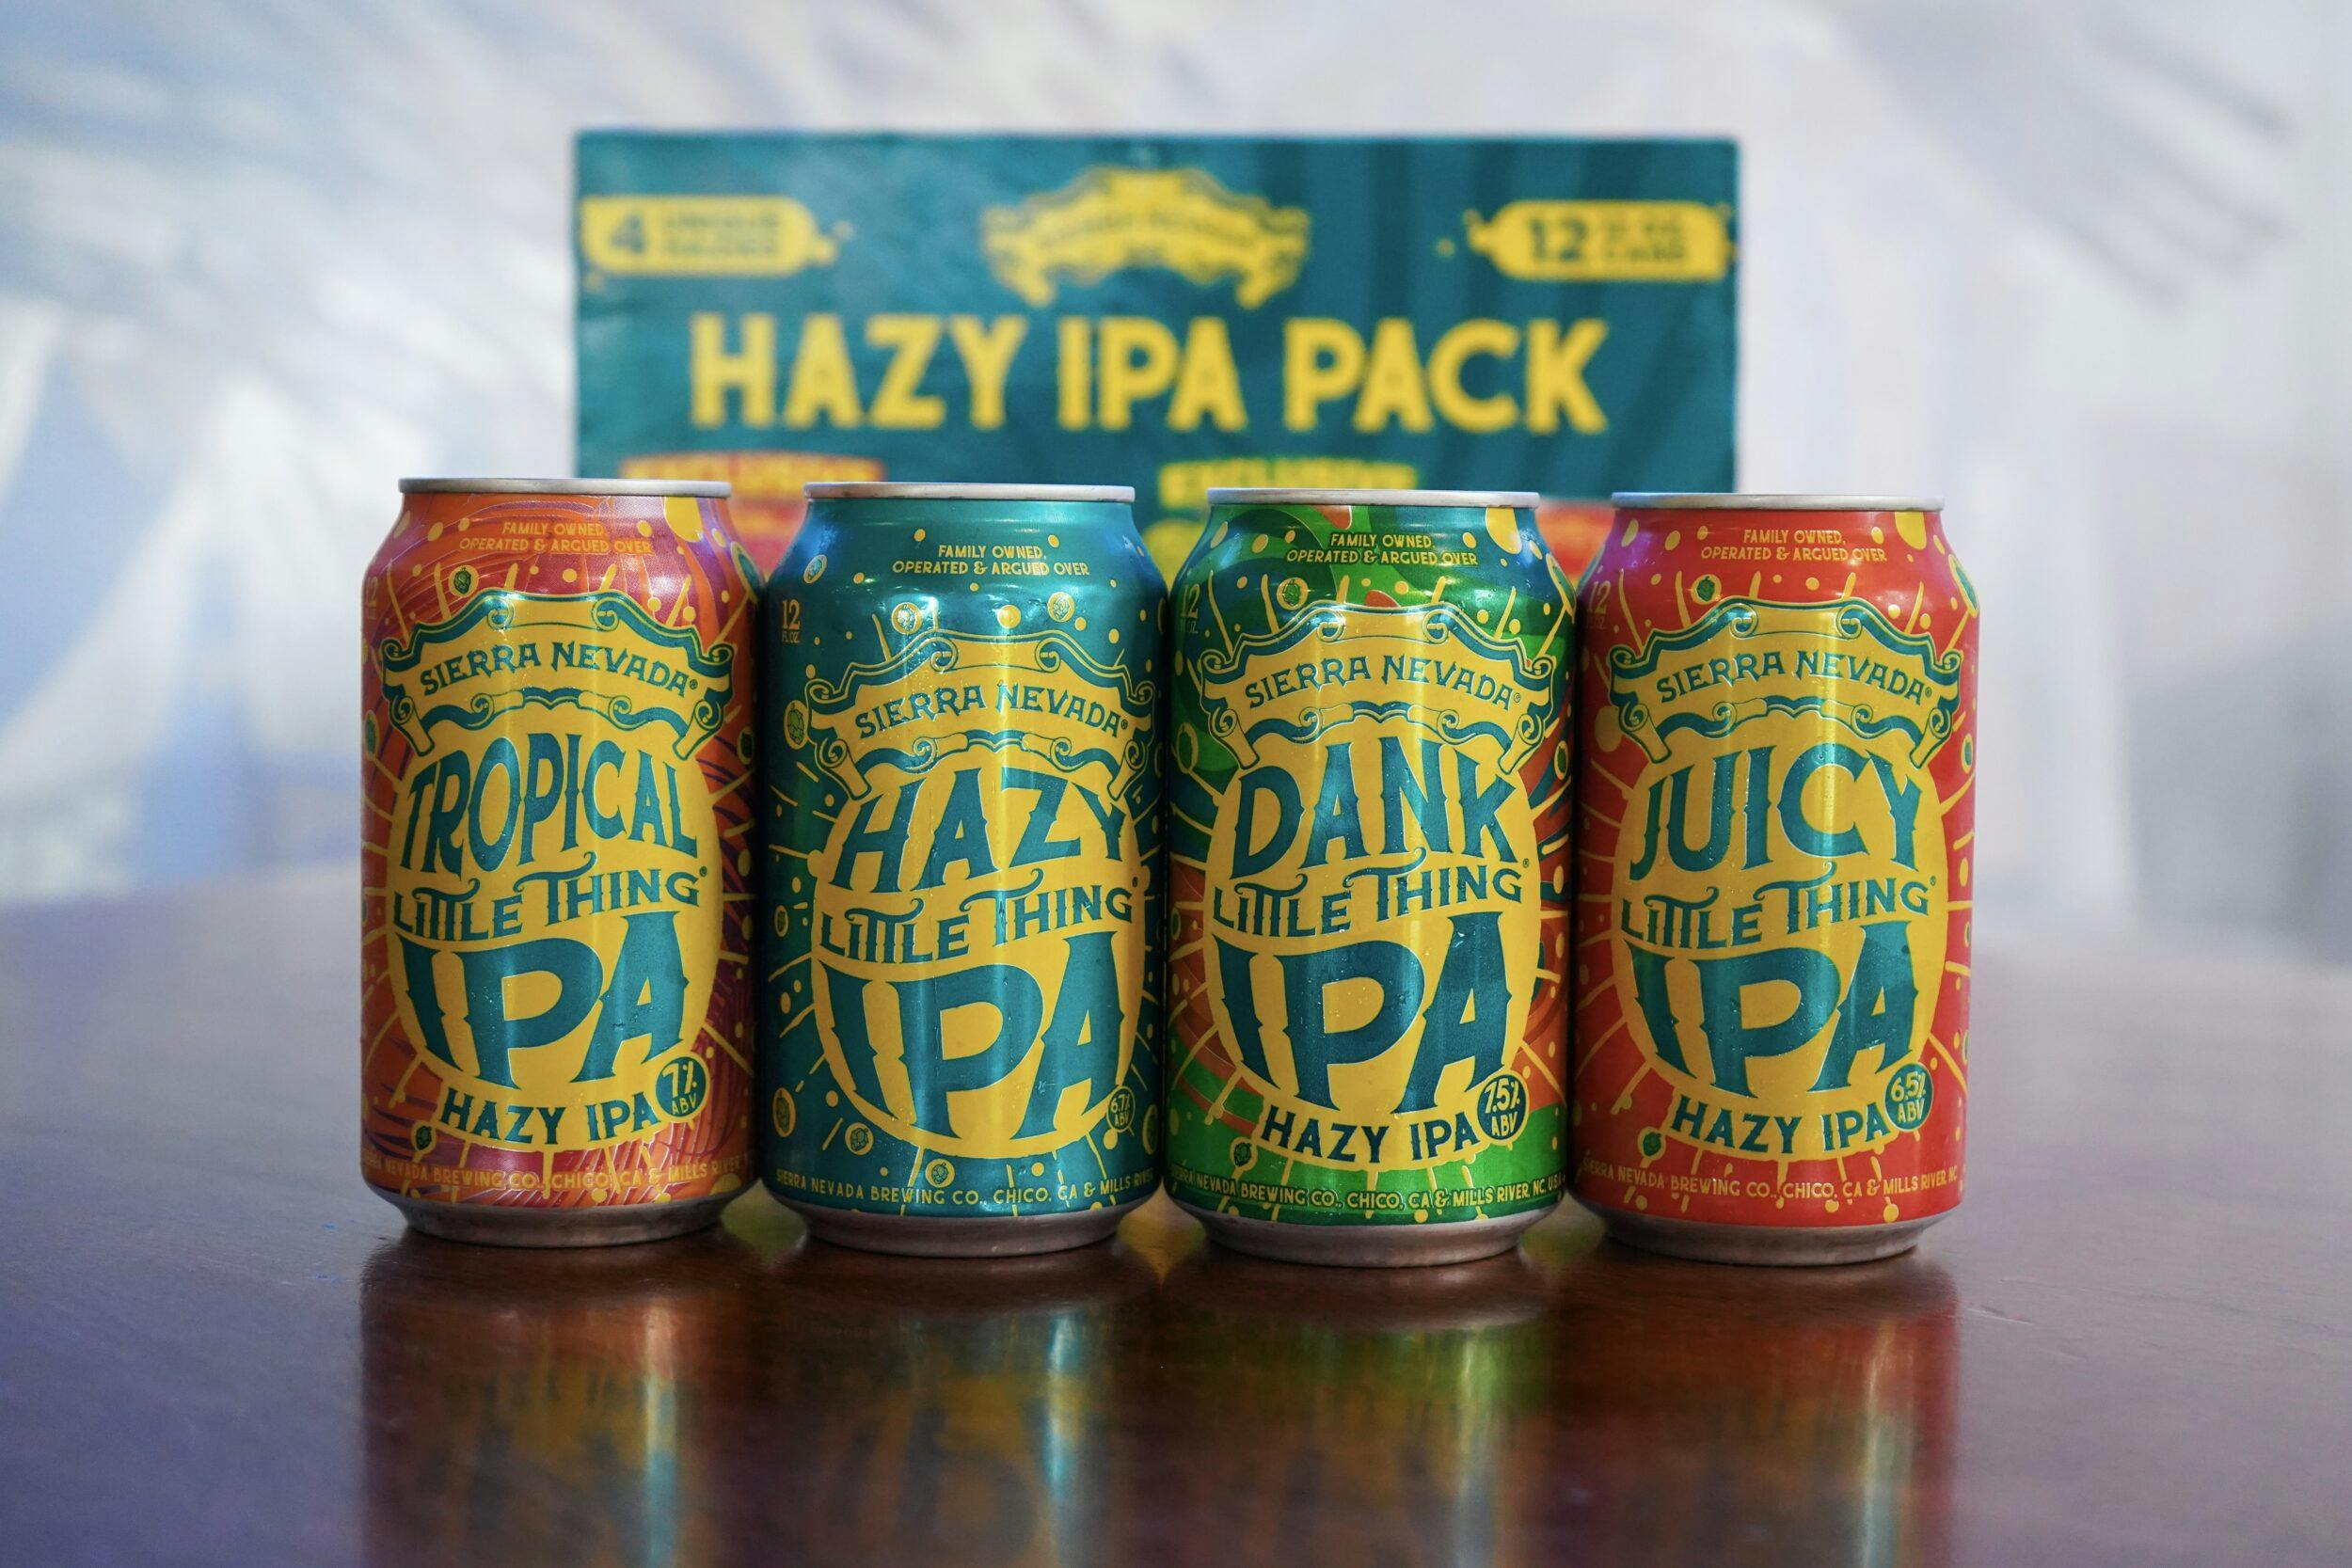 Lineup of cans that are in Hazy IPA Pack